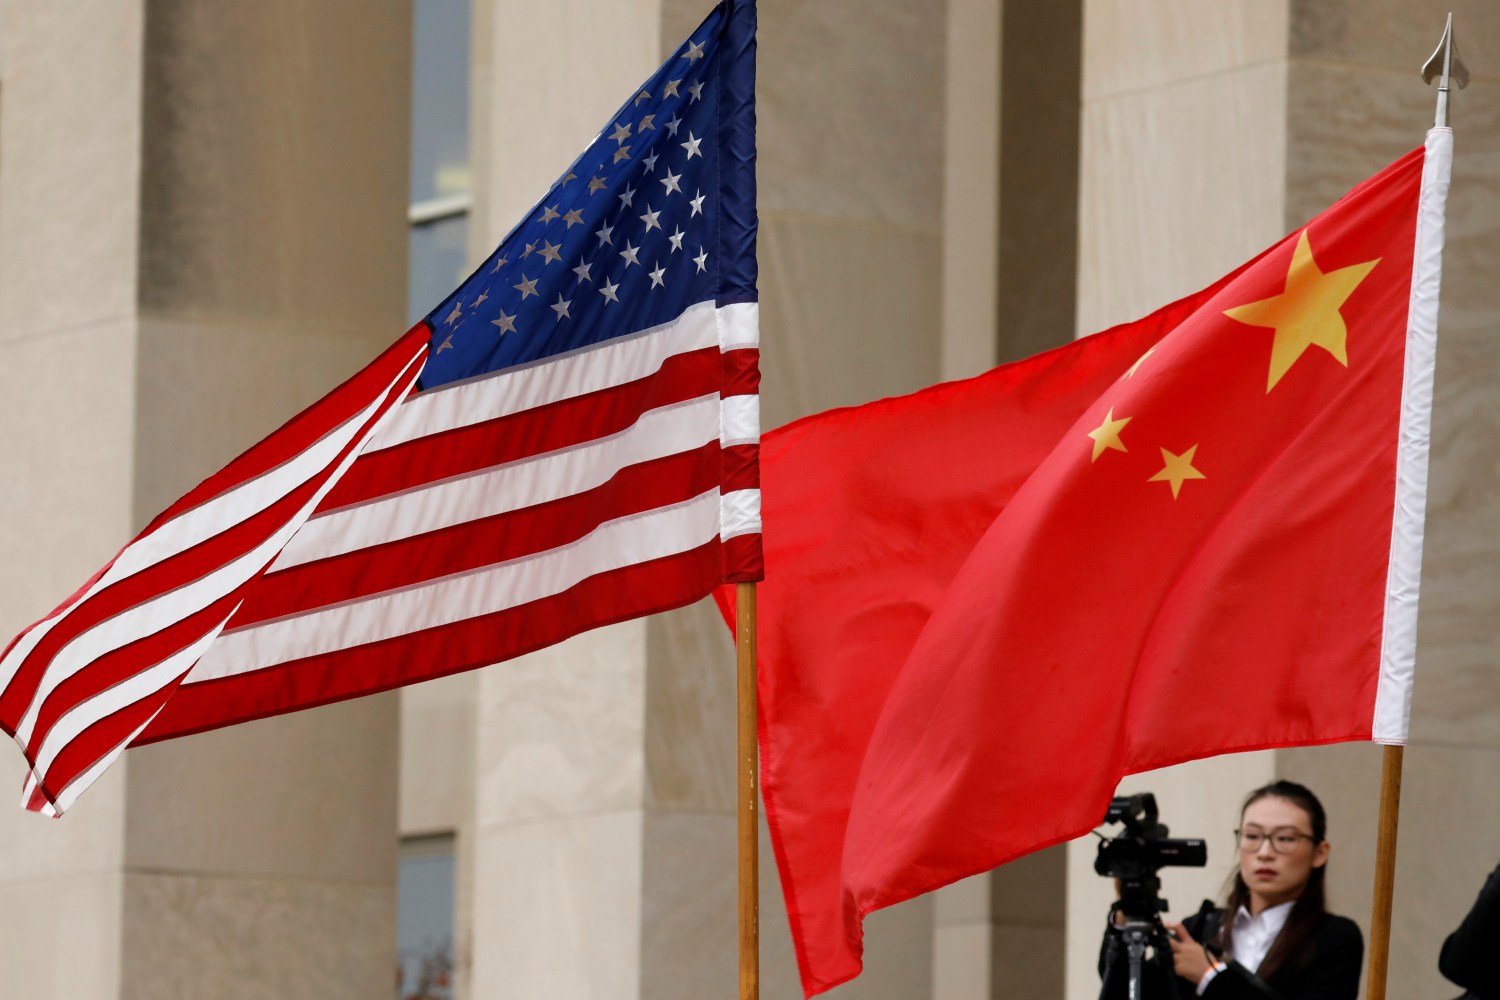 U.S. and Chinese flags seen before a meeting between senior defense officials at the Pentagon, Nov. 9, 2018. REUTERS/Yuri Gripas